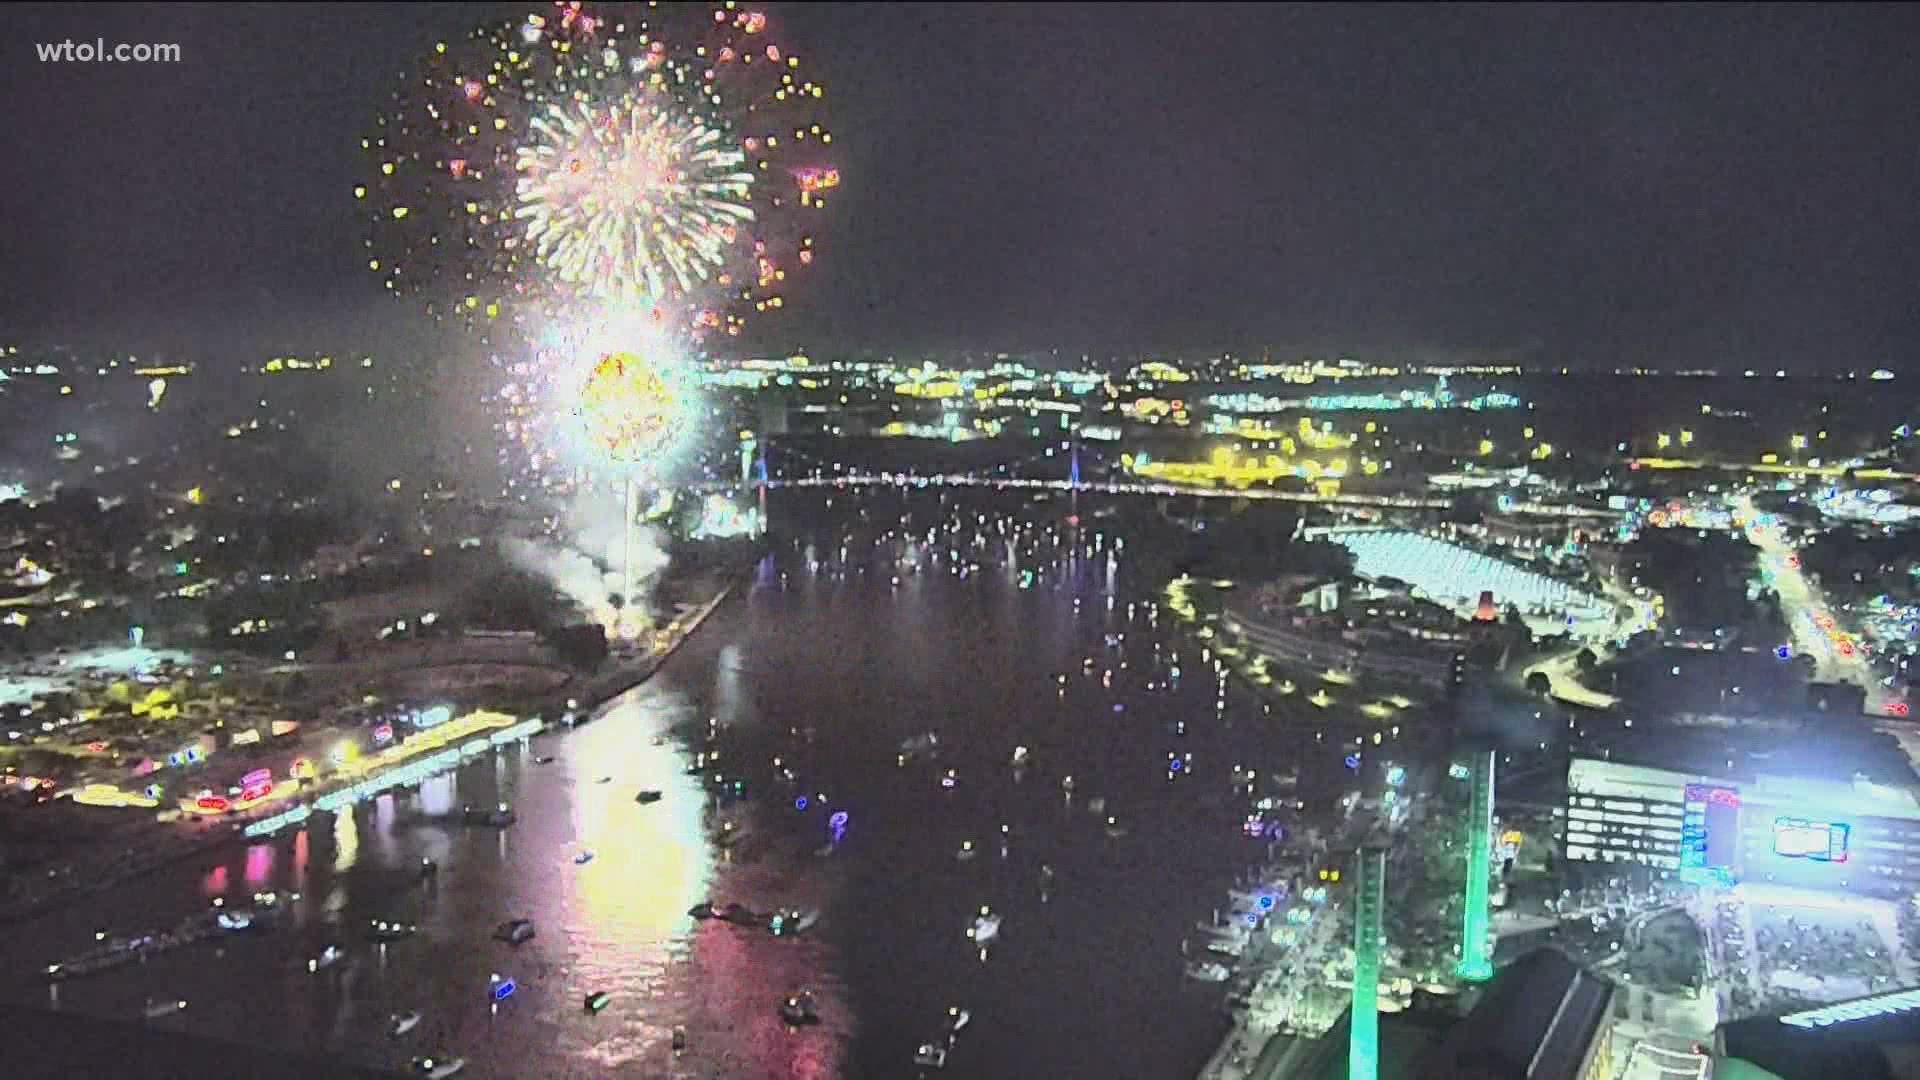 Fireworks! Downtown Toledo's show over the Maumee River